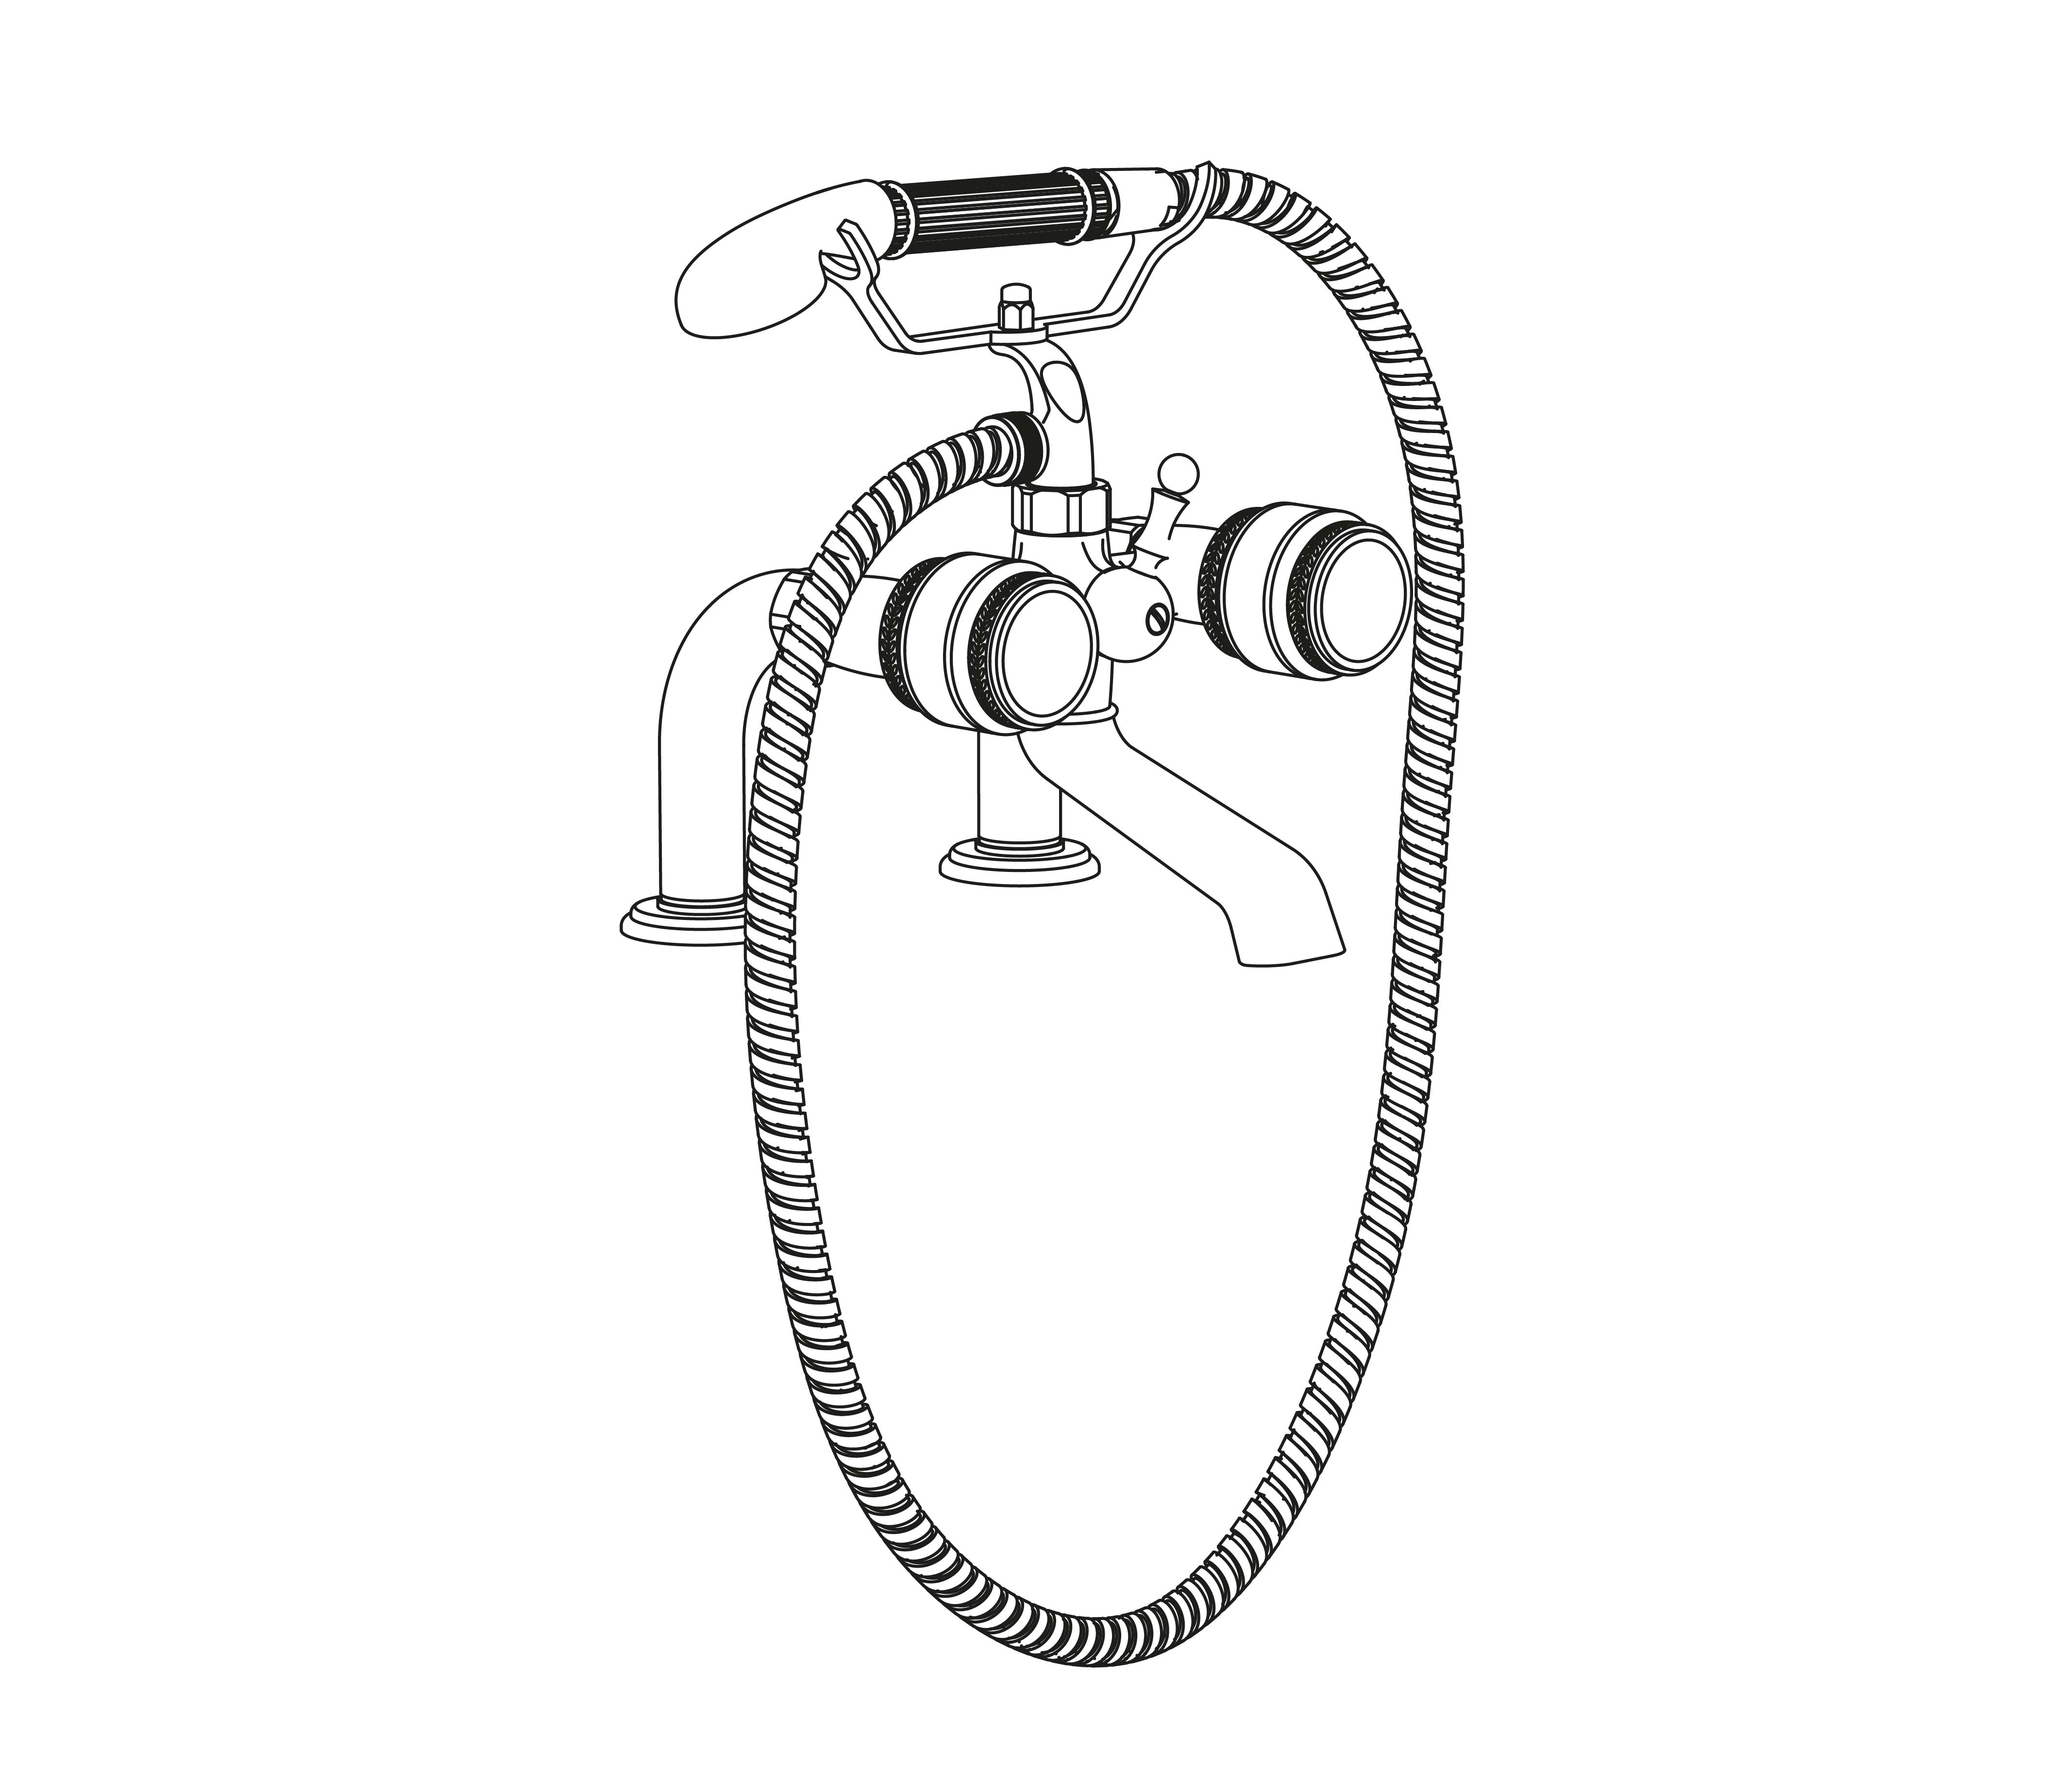 S150-3306 Rim mounted bath and shower mixer